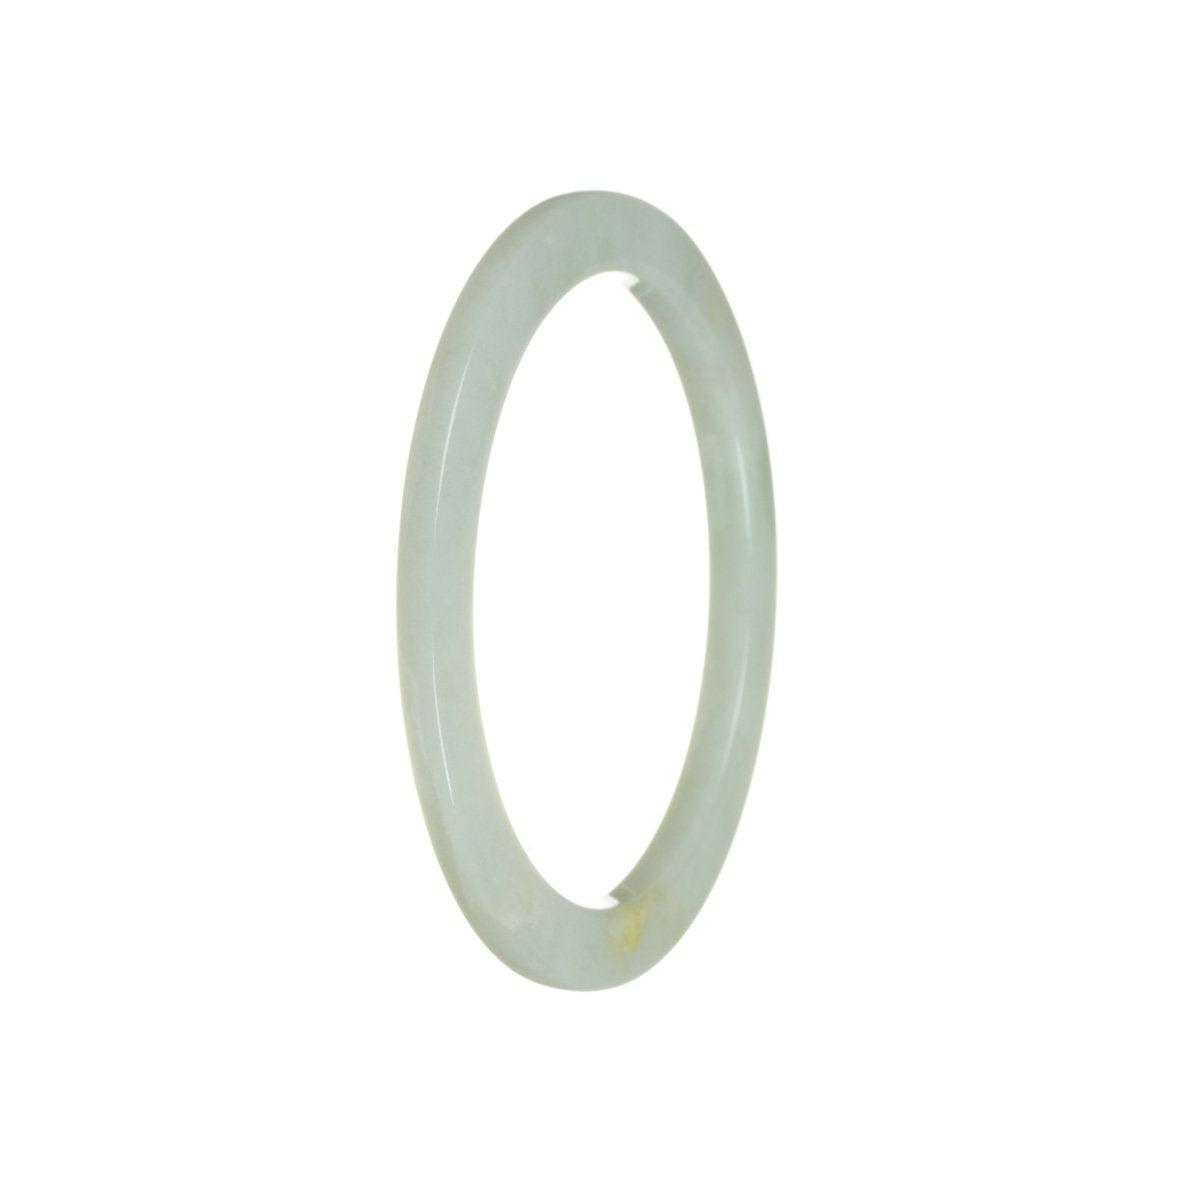 A slim, 59mm authentic Type A White with Pale Green Burmese Jade bangle designed by MAYS.